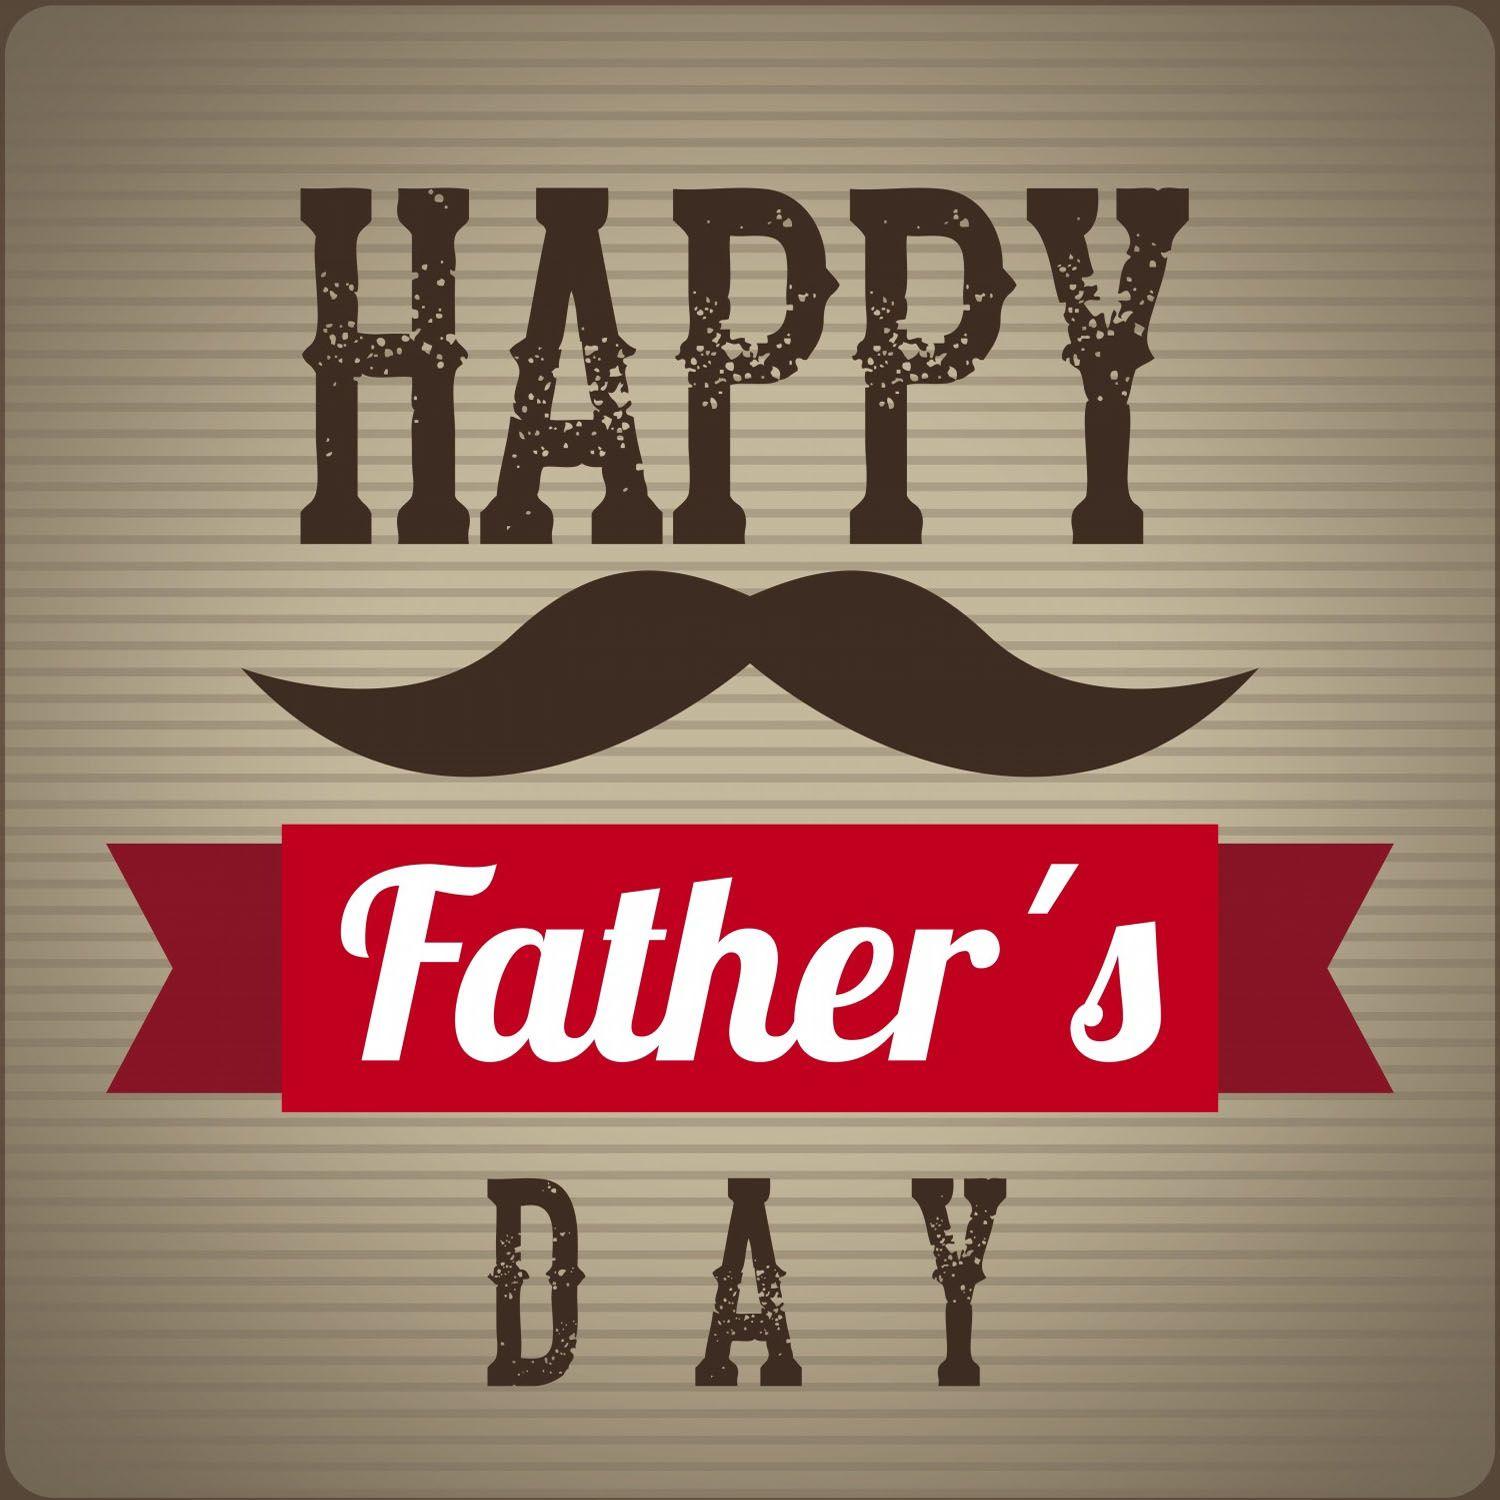 Happy Father's Day Image. Beautiful image HD Picture & Desktop